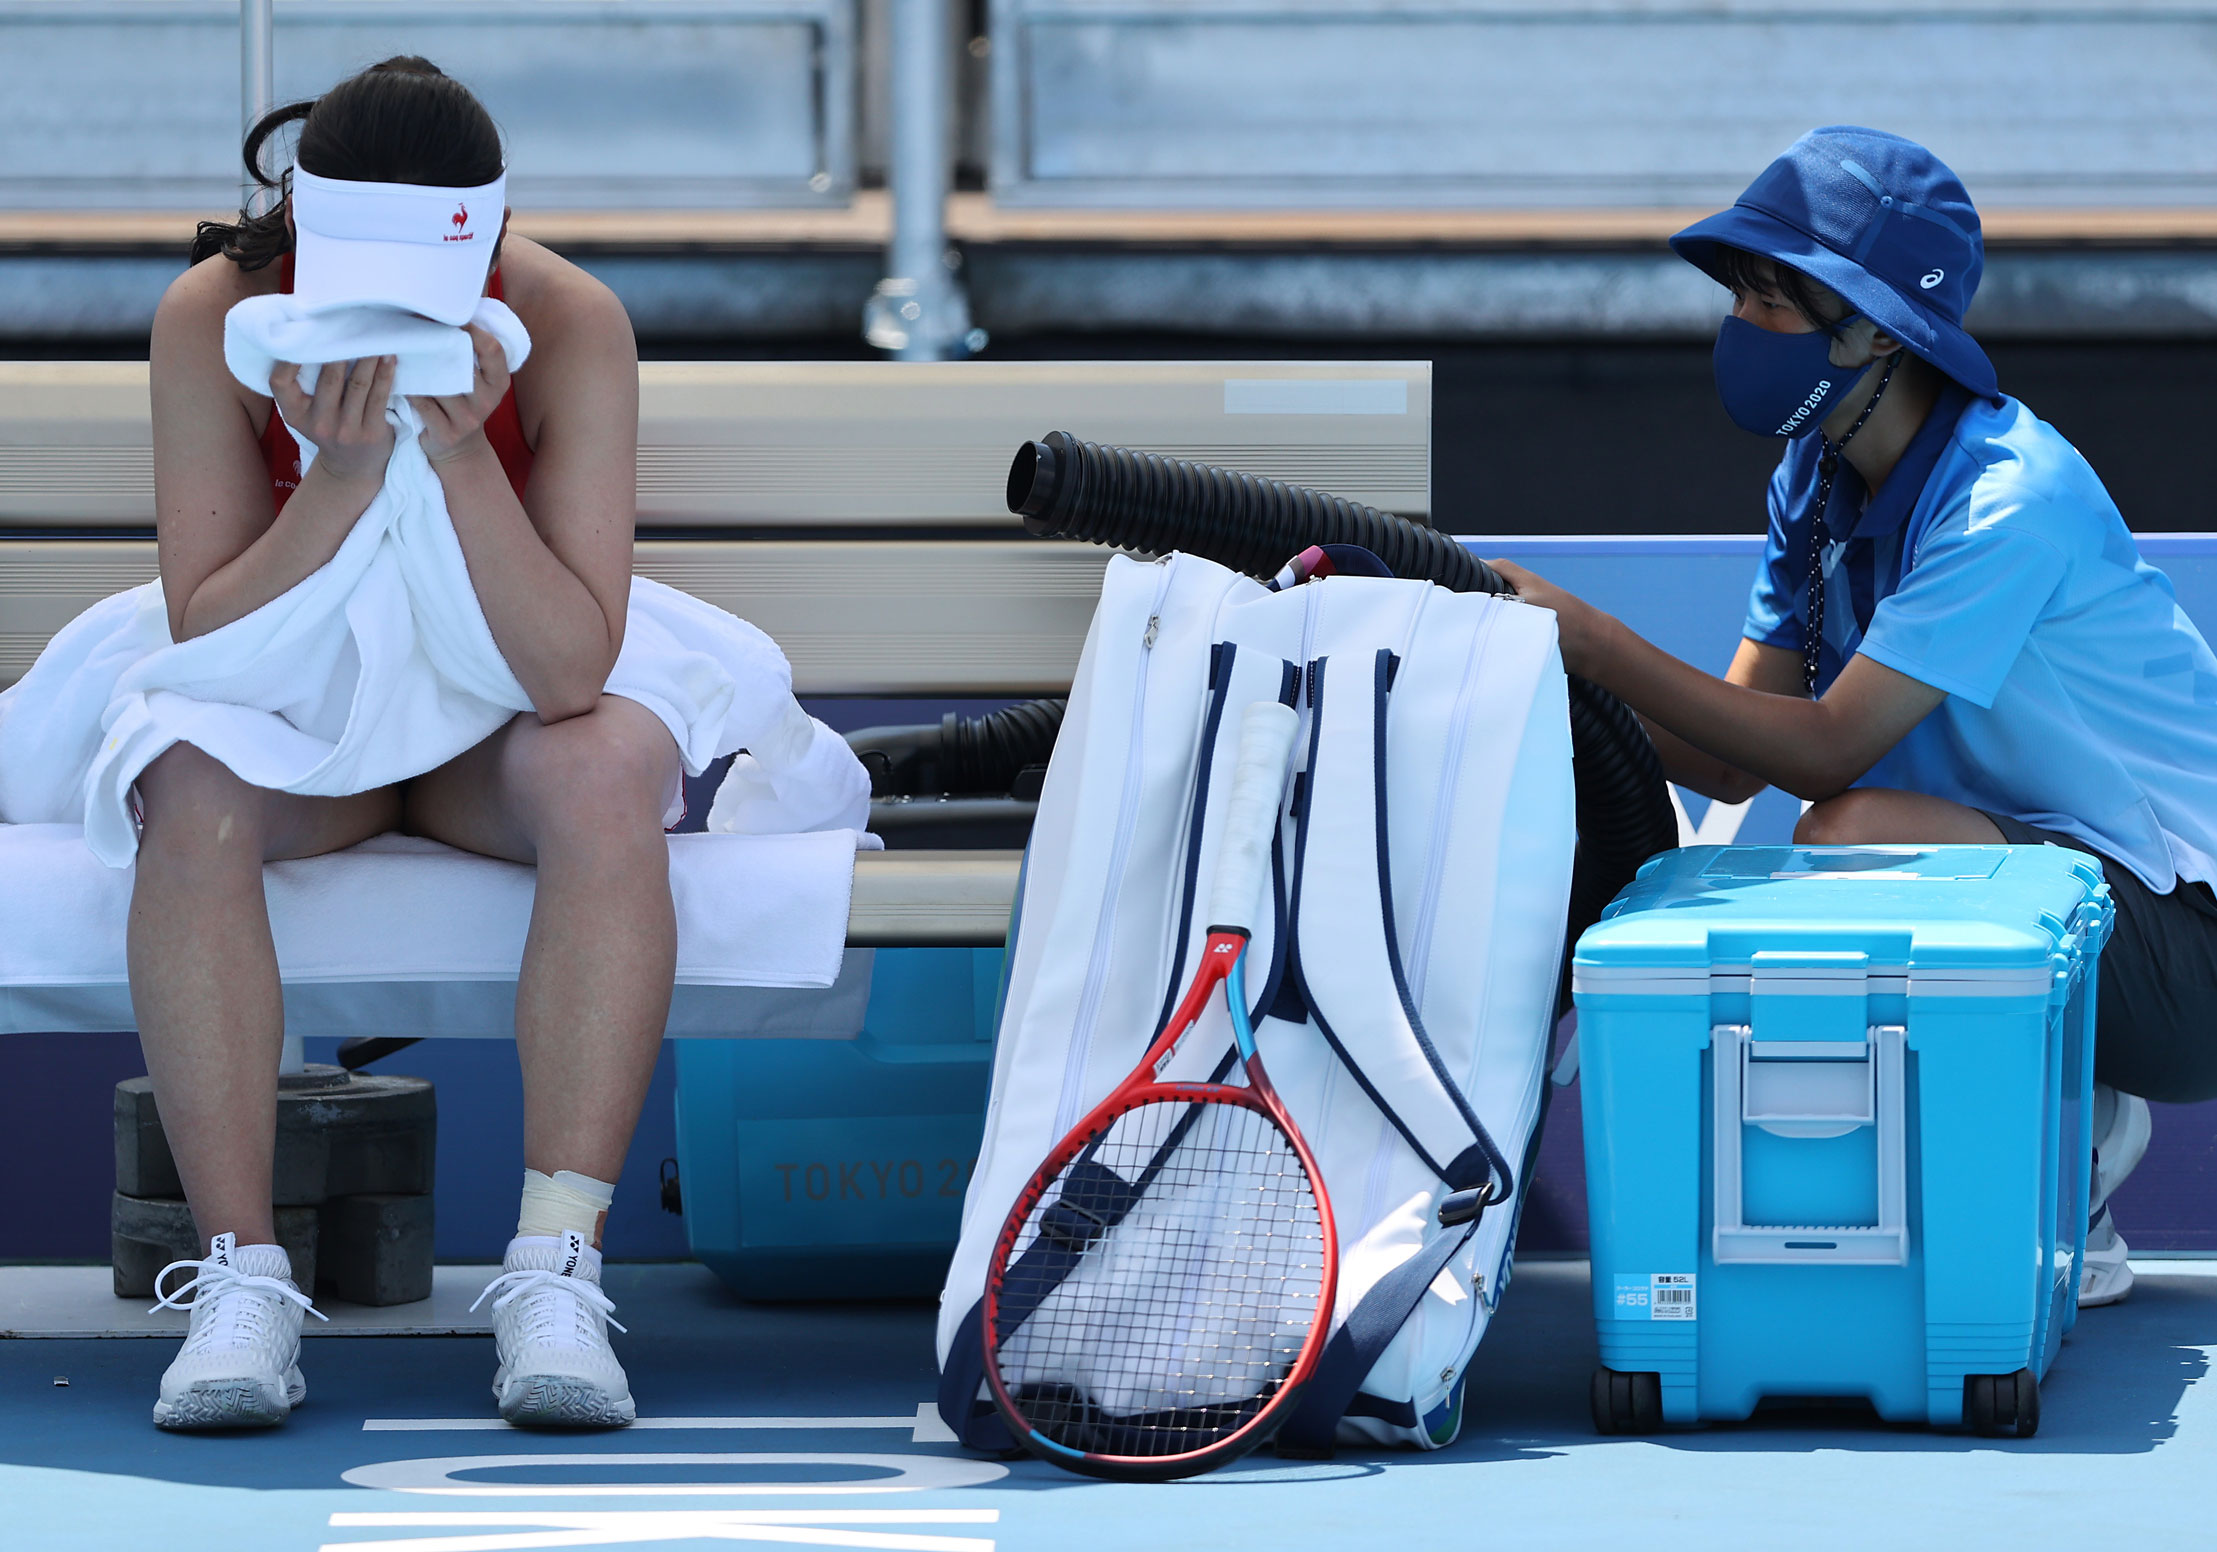 Nao Hibino of Japan cools down between games during her Women's Singles First Round match on July 24.